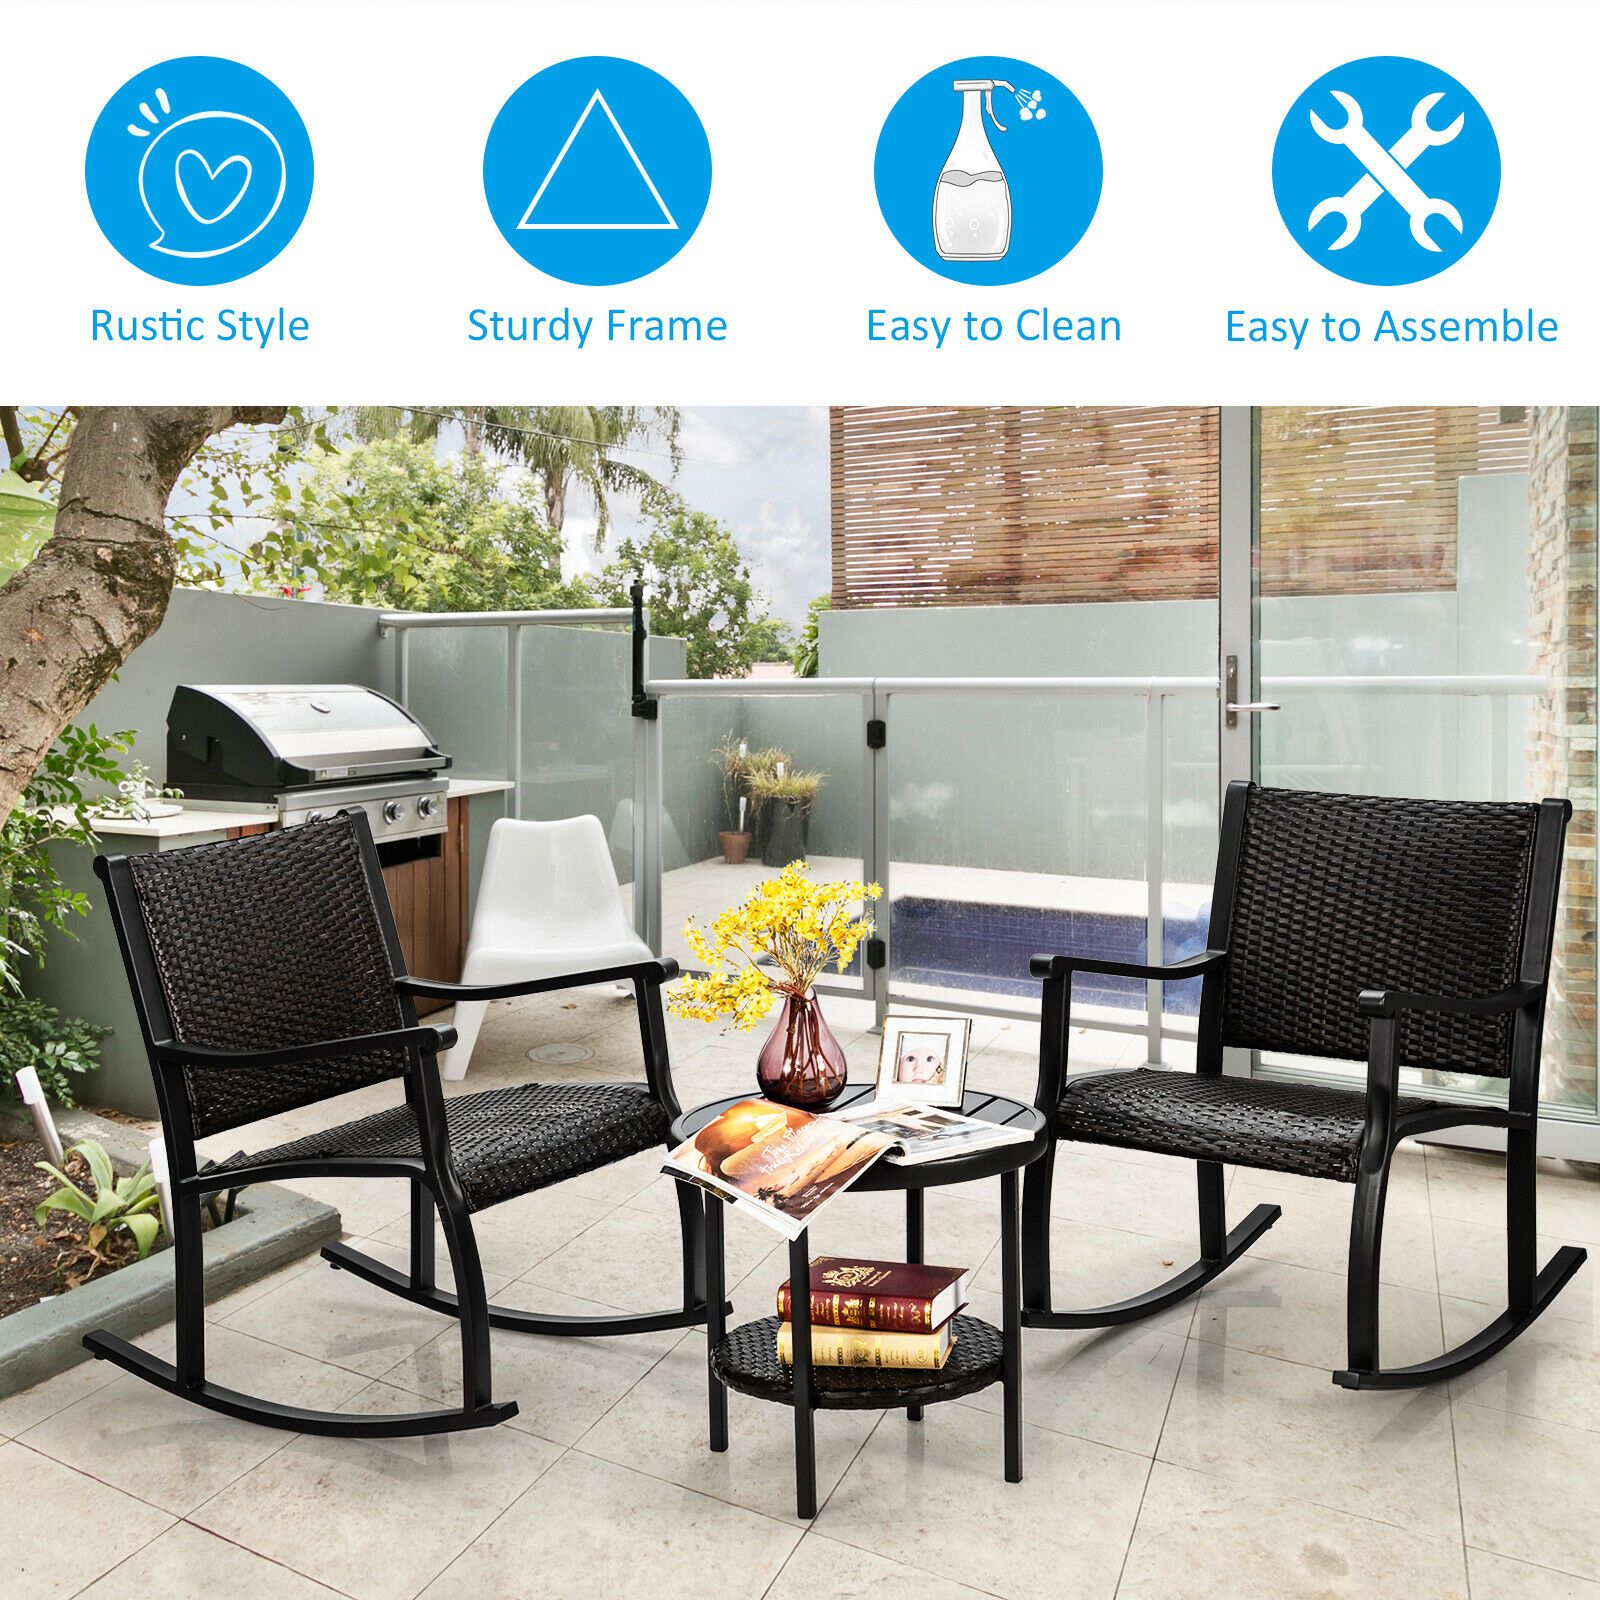 3 Piece Rocking Table Chairs Set with Coffee Table for Poolside